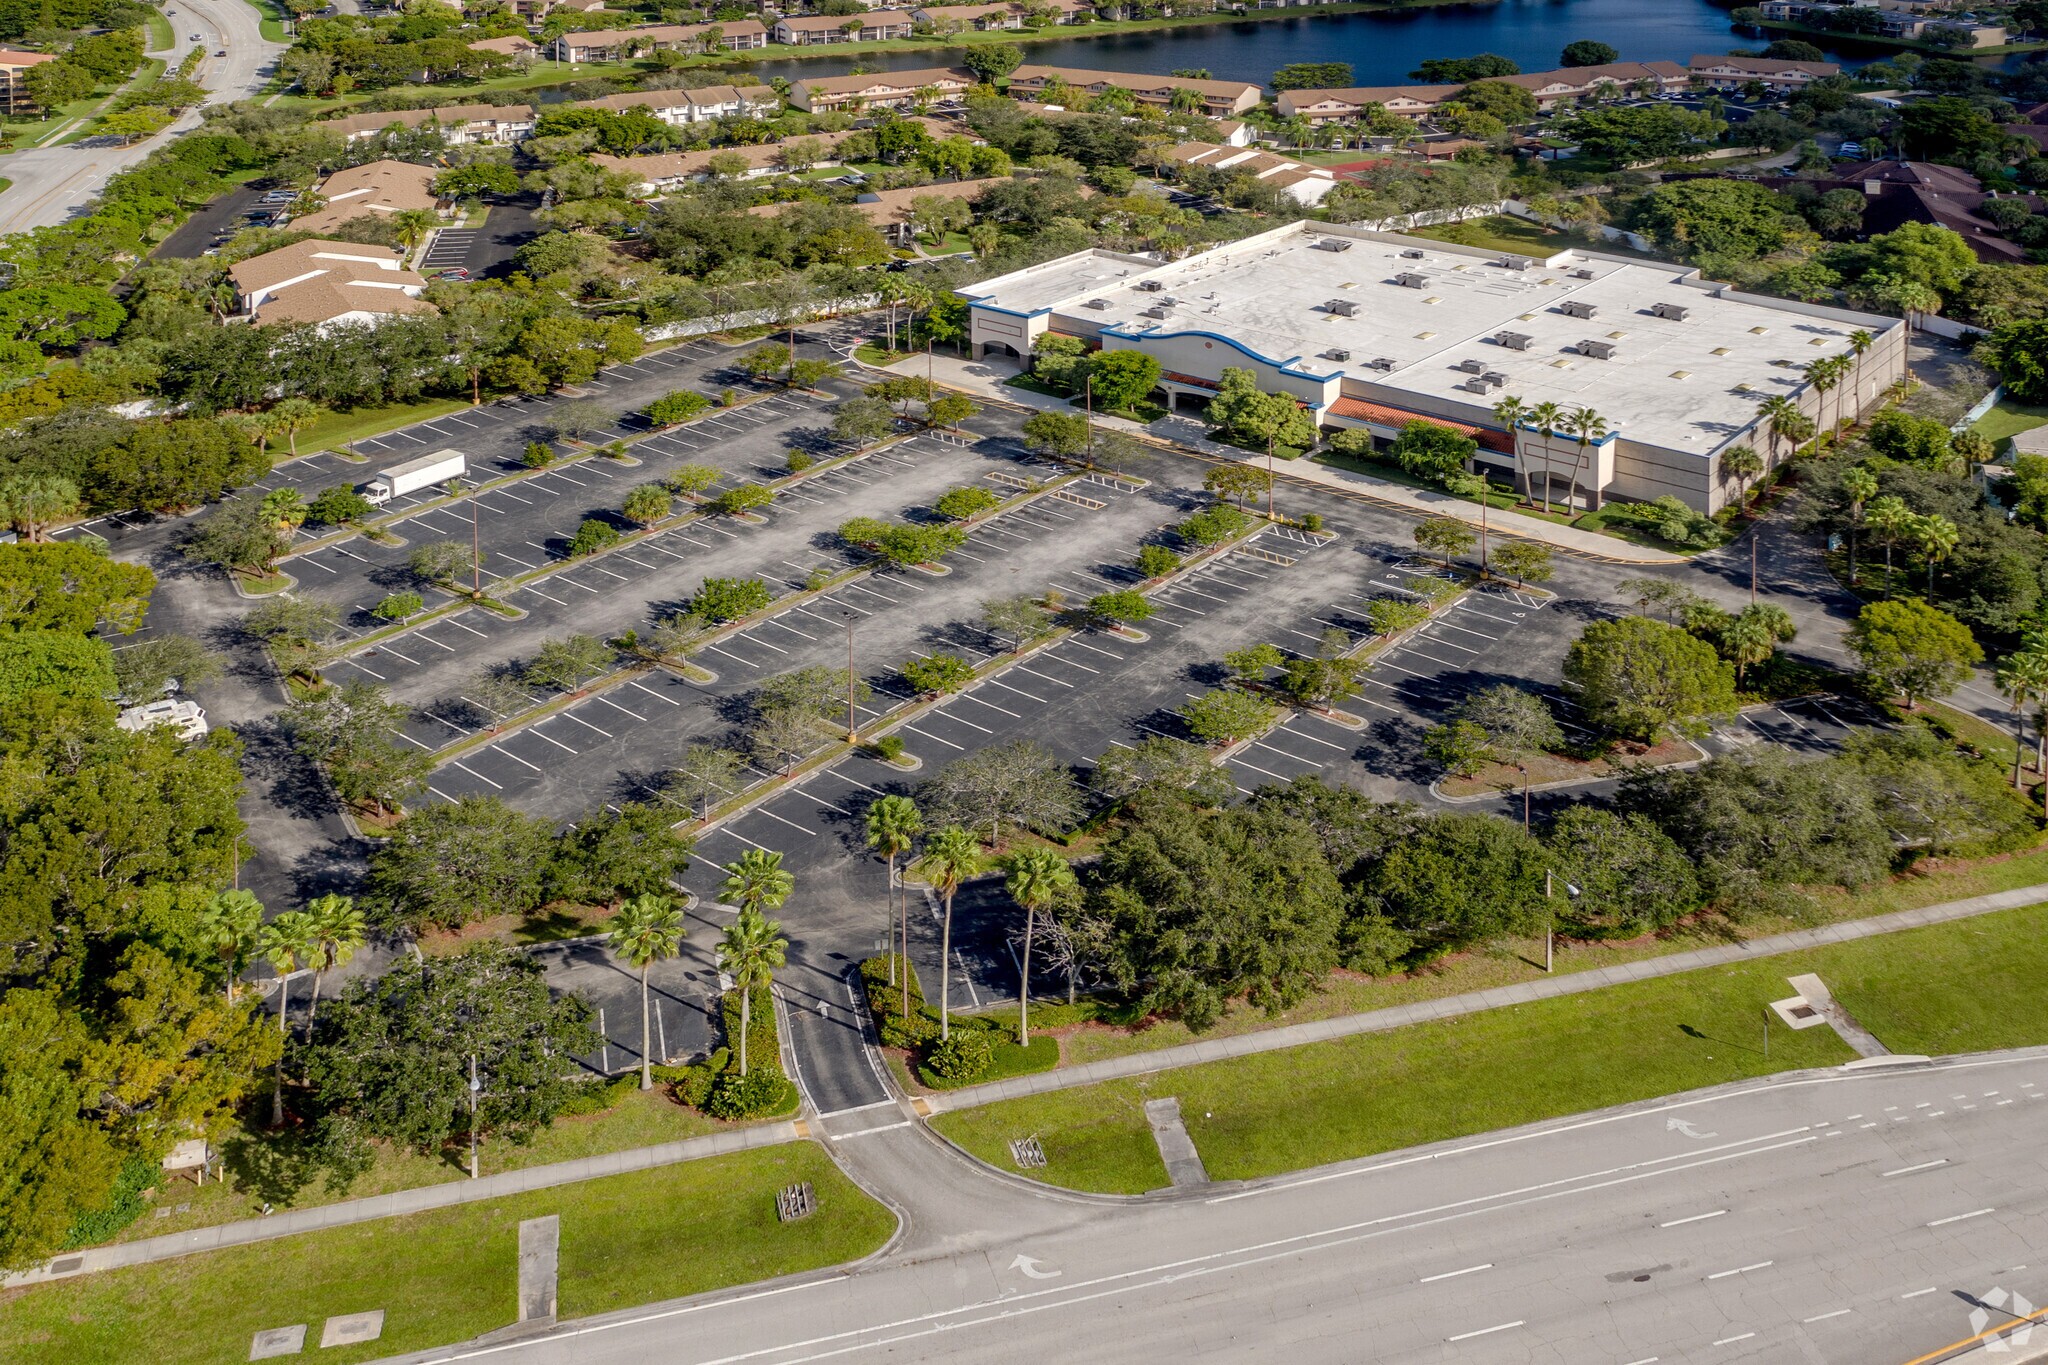 Crunch Fitness will open a massive, 53,024-square-foot gym in Sunrise, Florida, after leasing theis freestanding Broward County retail building. (CoStar). <br>